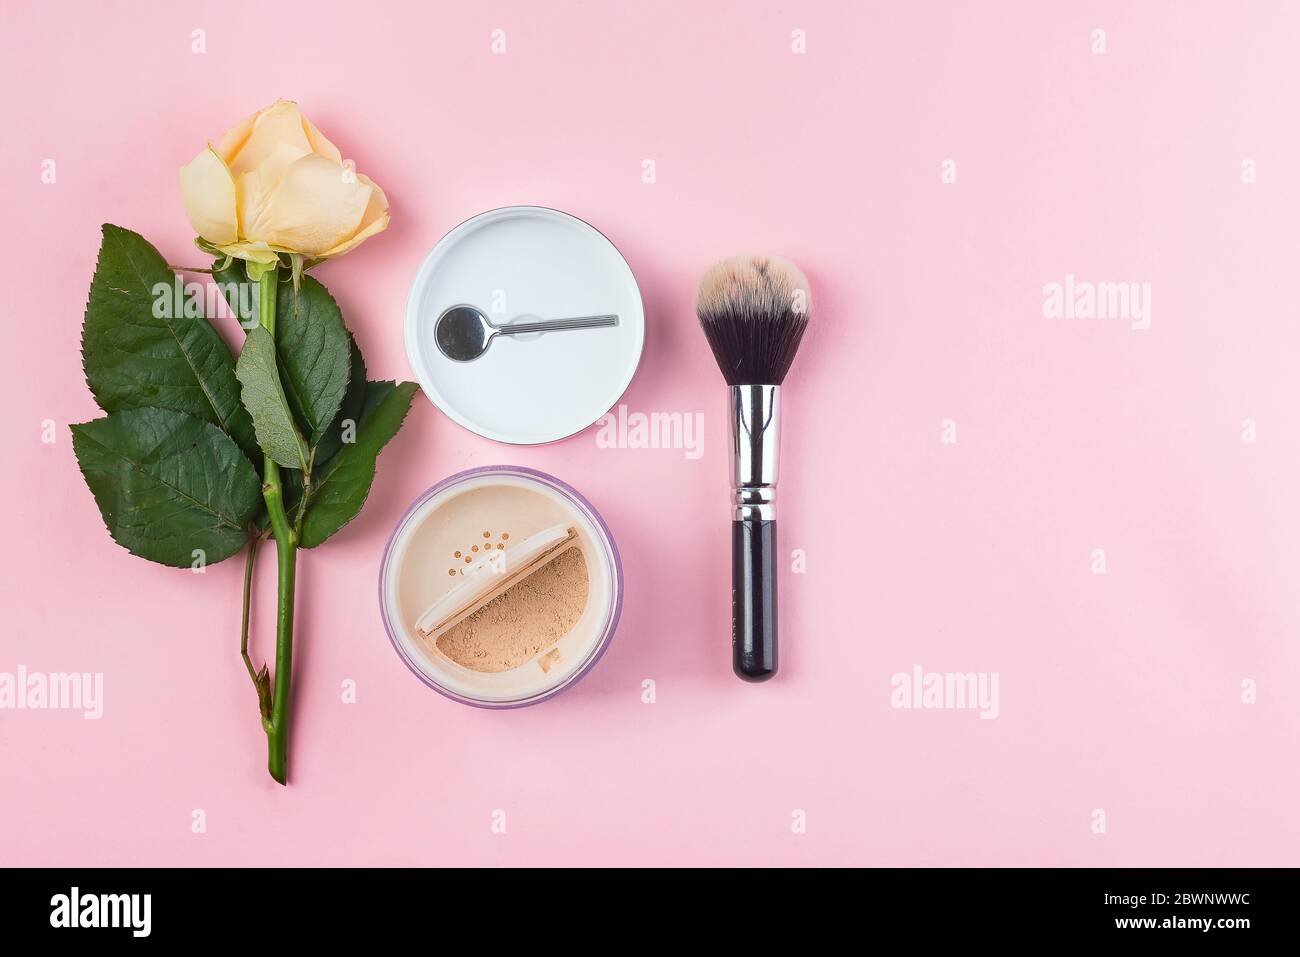 Set of cosmetics powder and brushe with rose on pink background. Makeup Accessories Top view Flat Lay Stock Photo